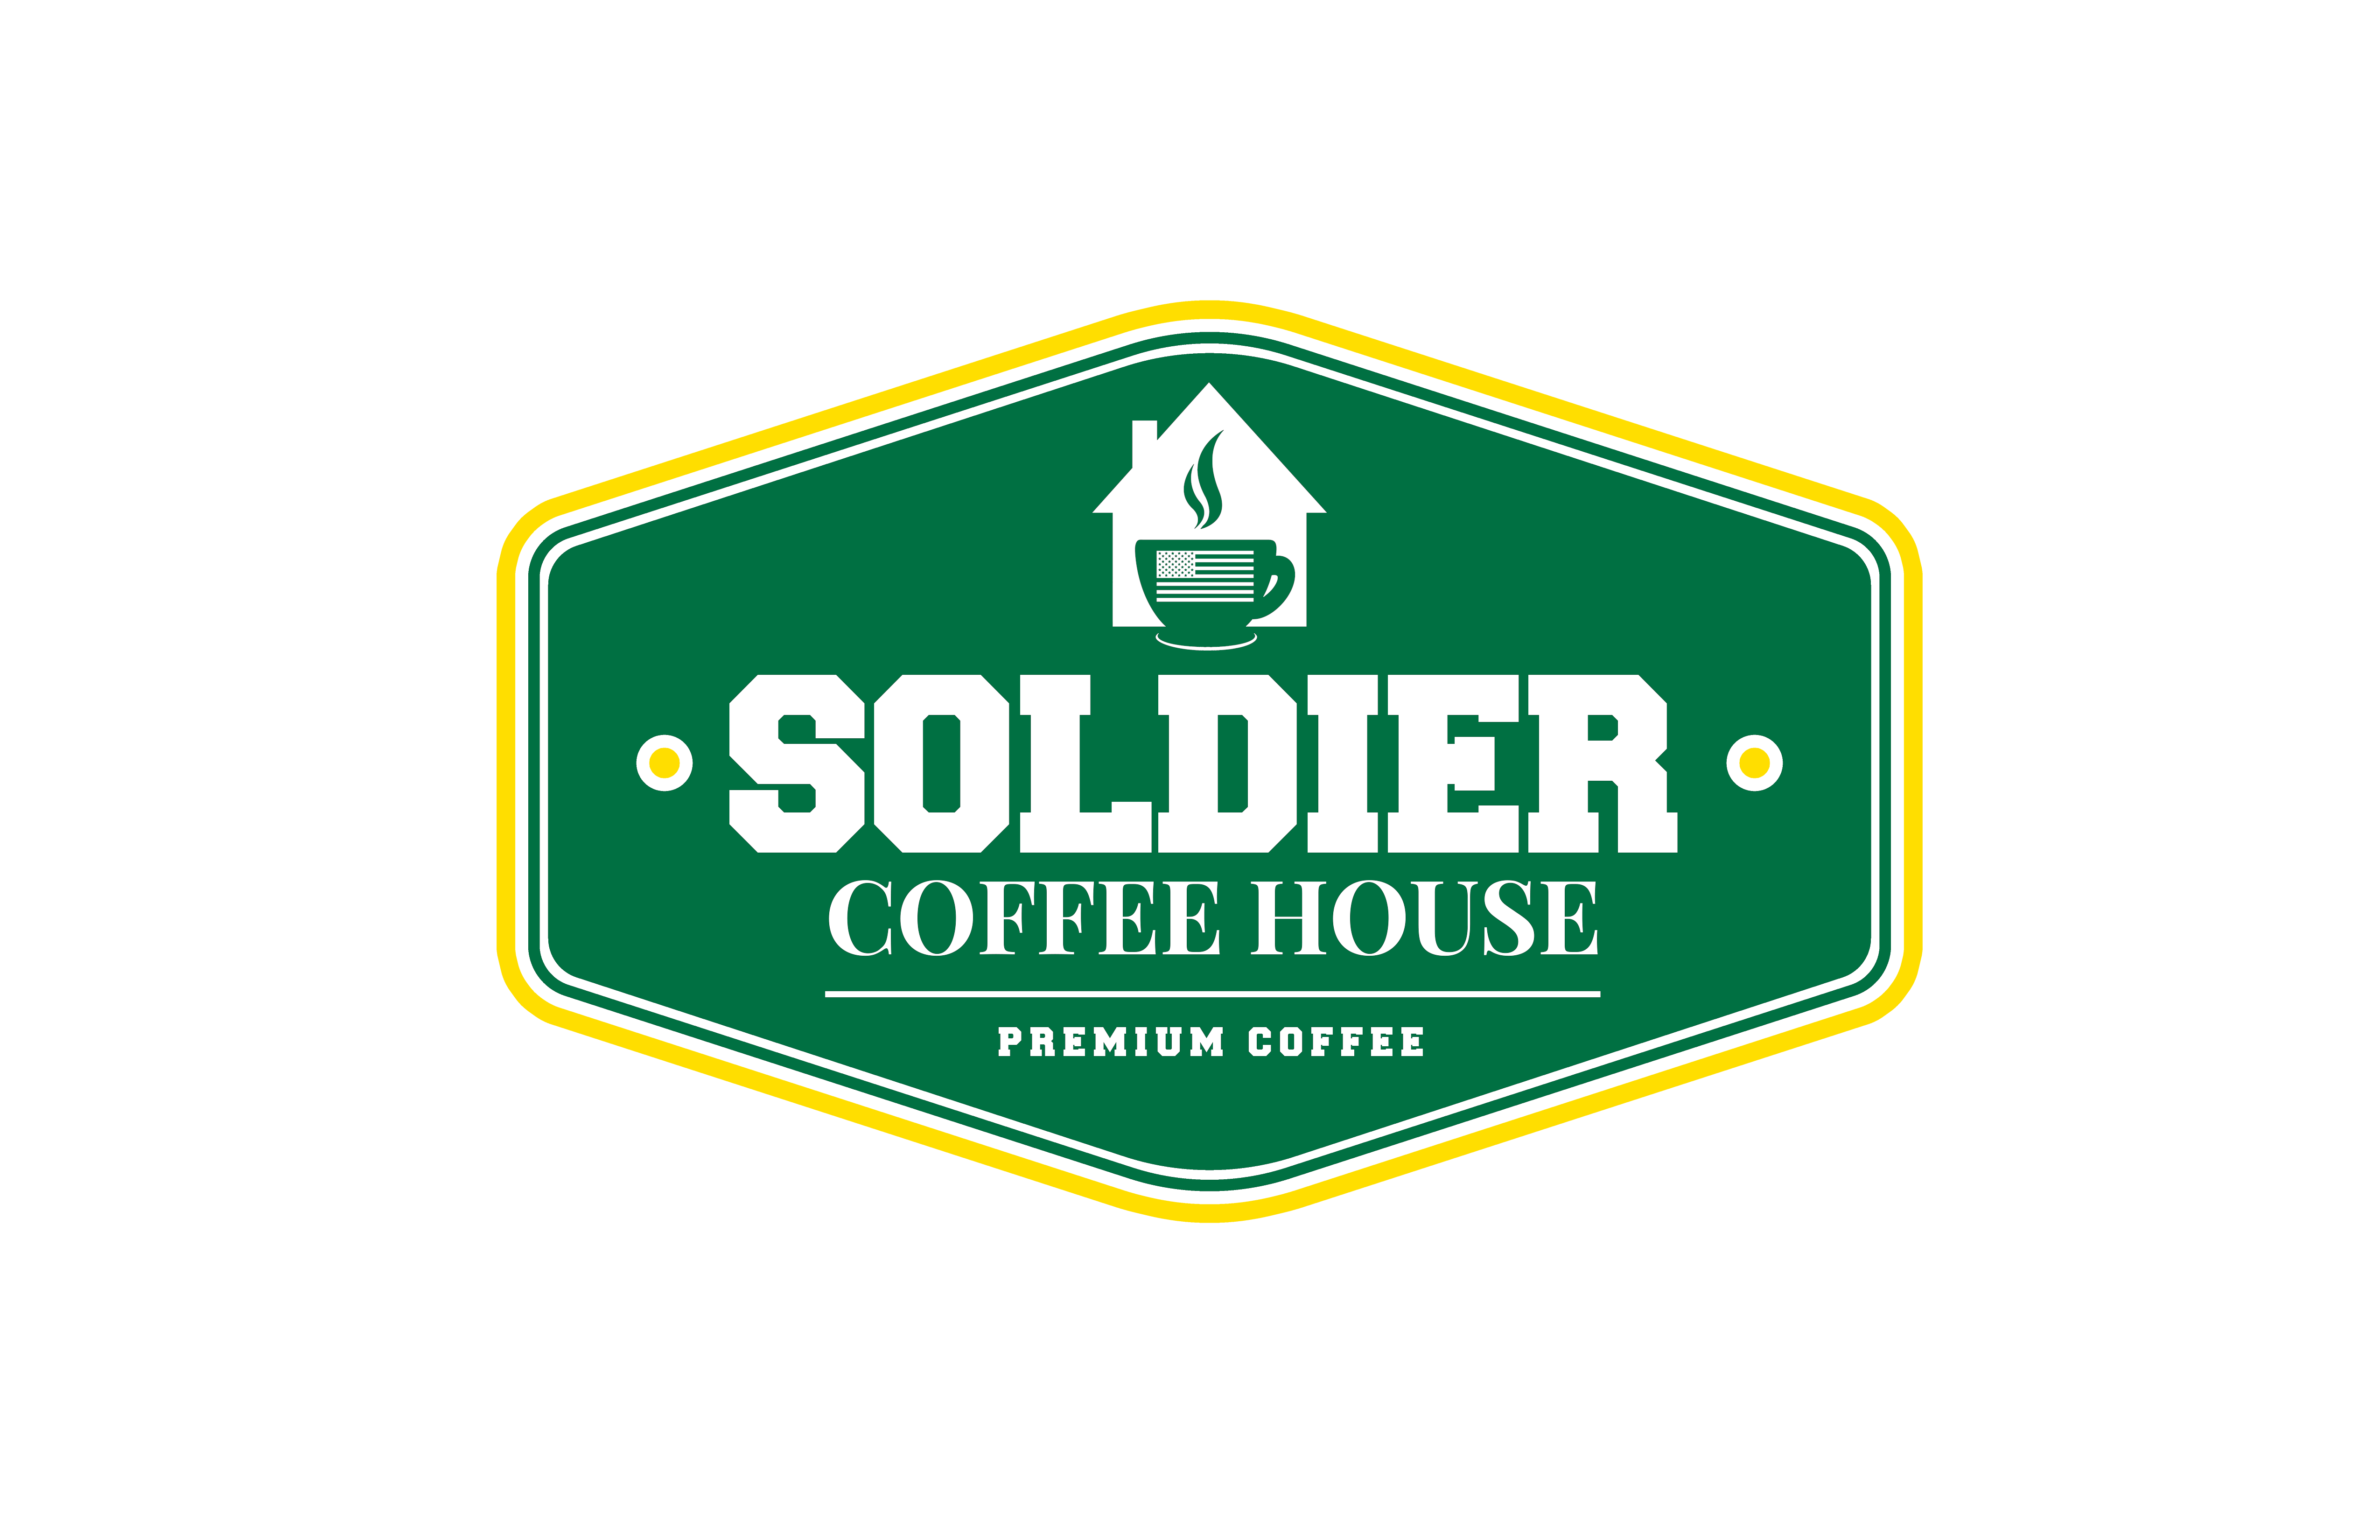 SOLDIER COFFEE HOUSE